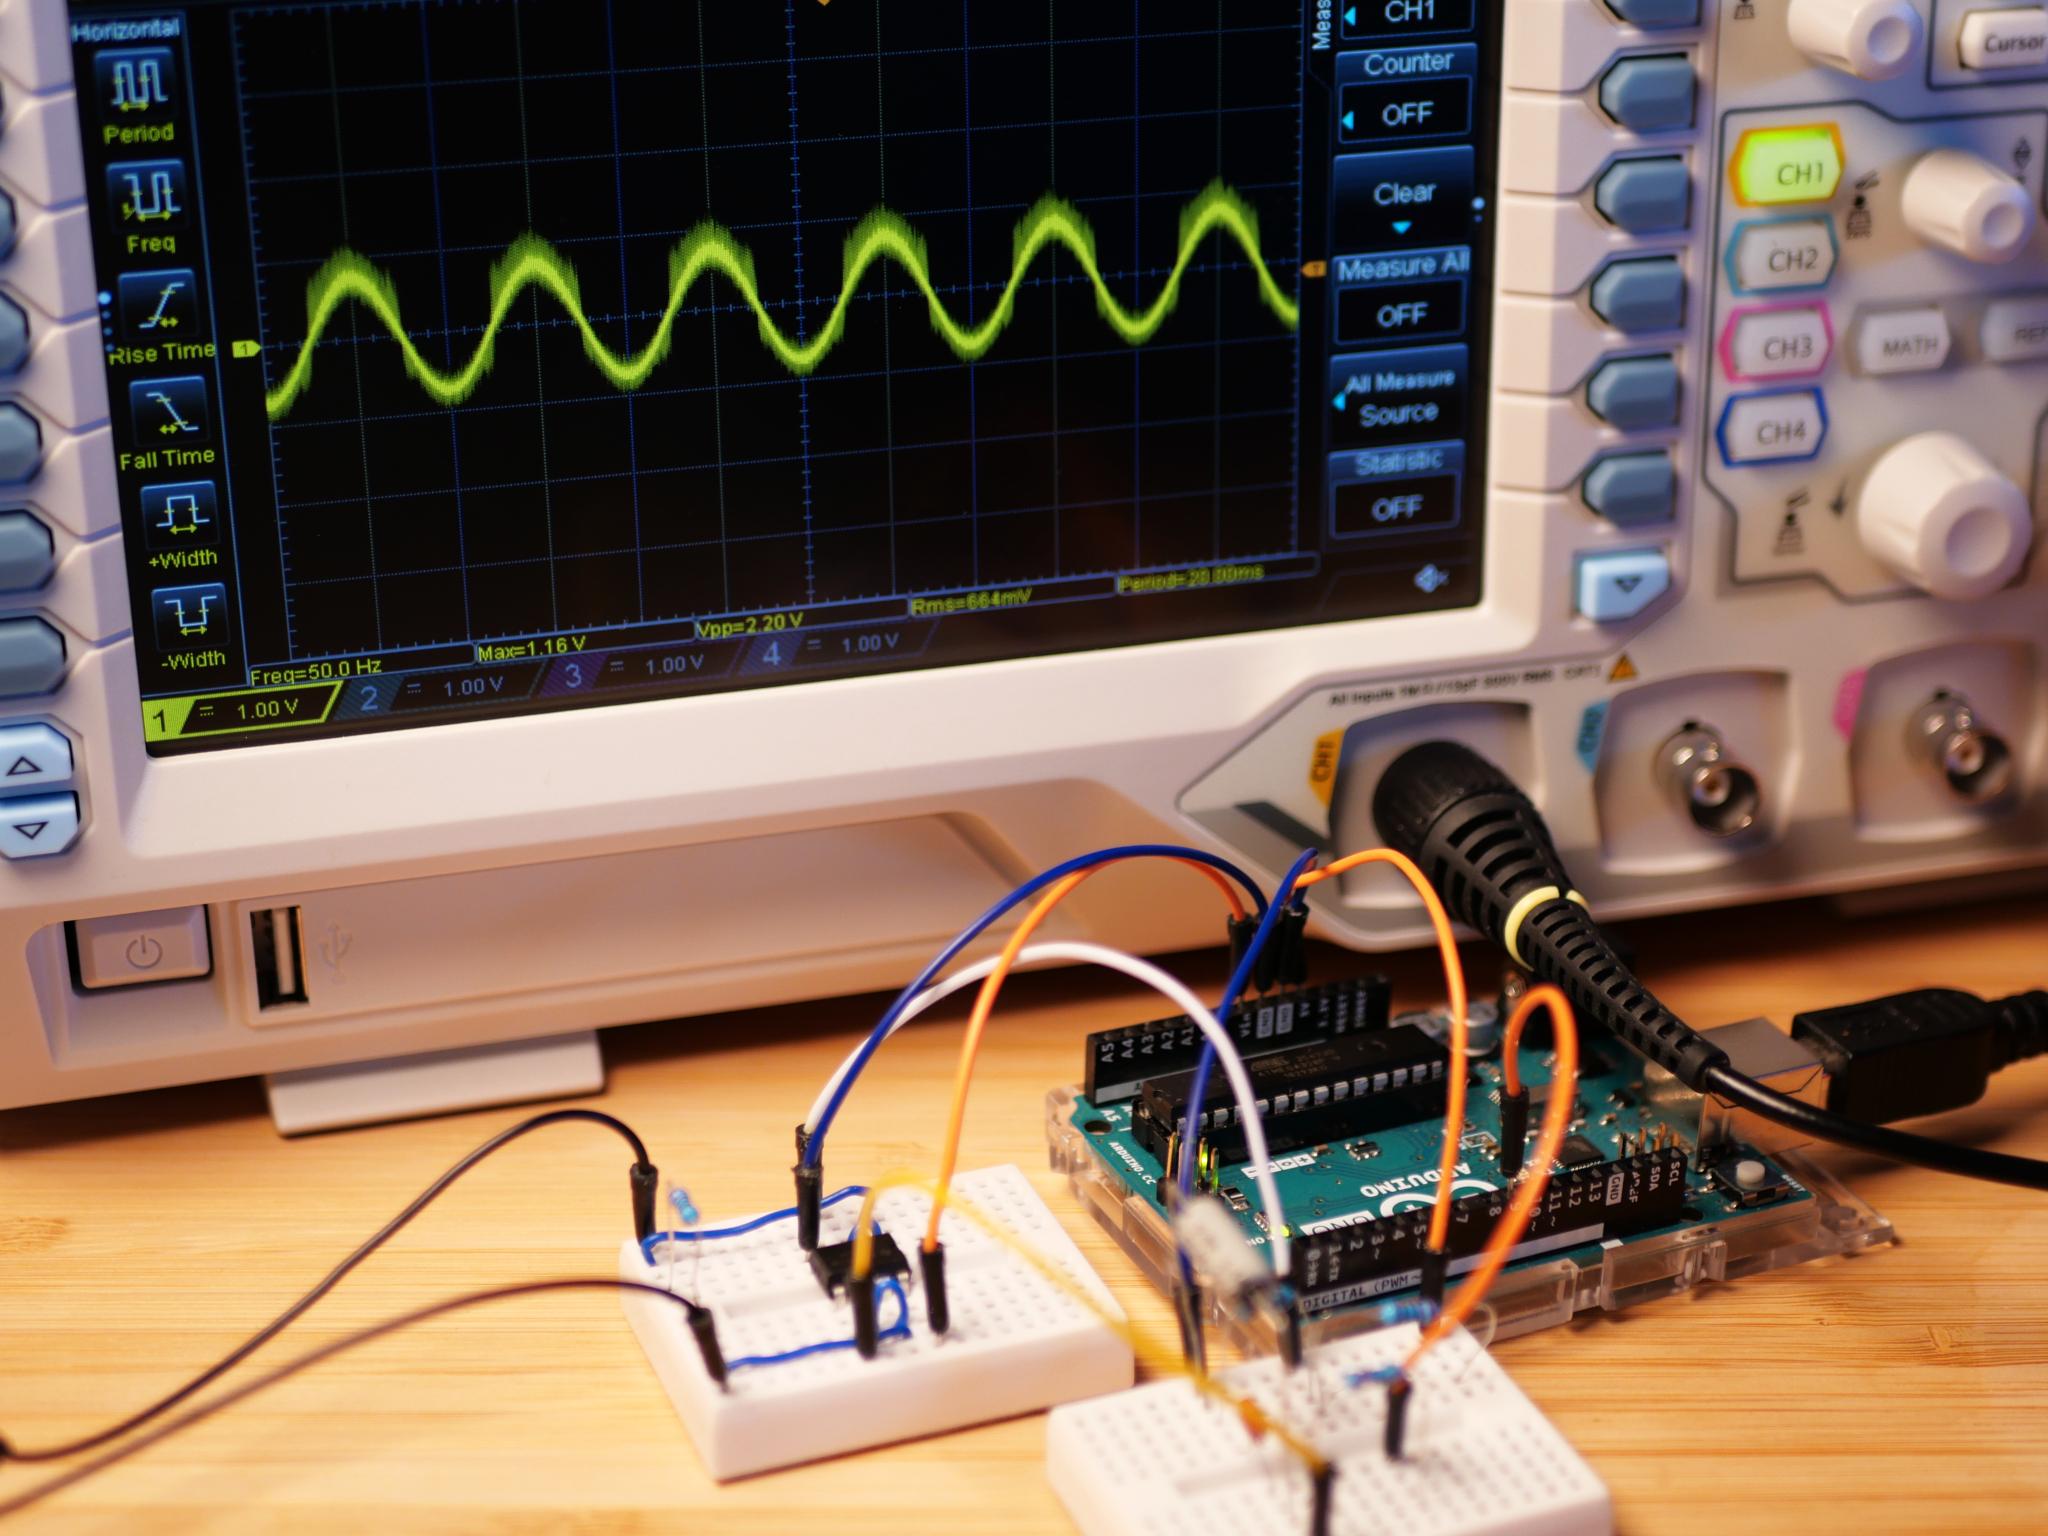 Sine wave signal output without external 9 V battery and an amplitude of 0.75 V